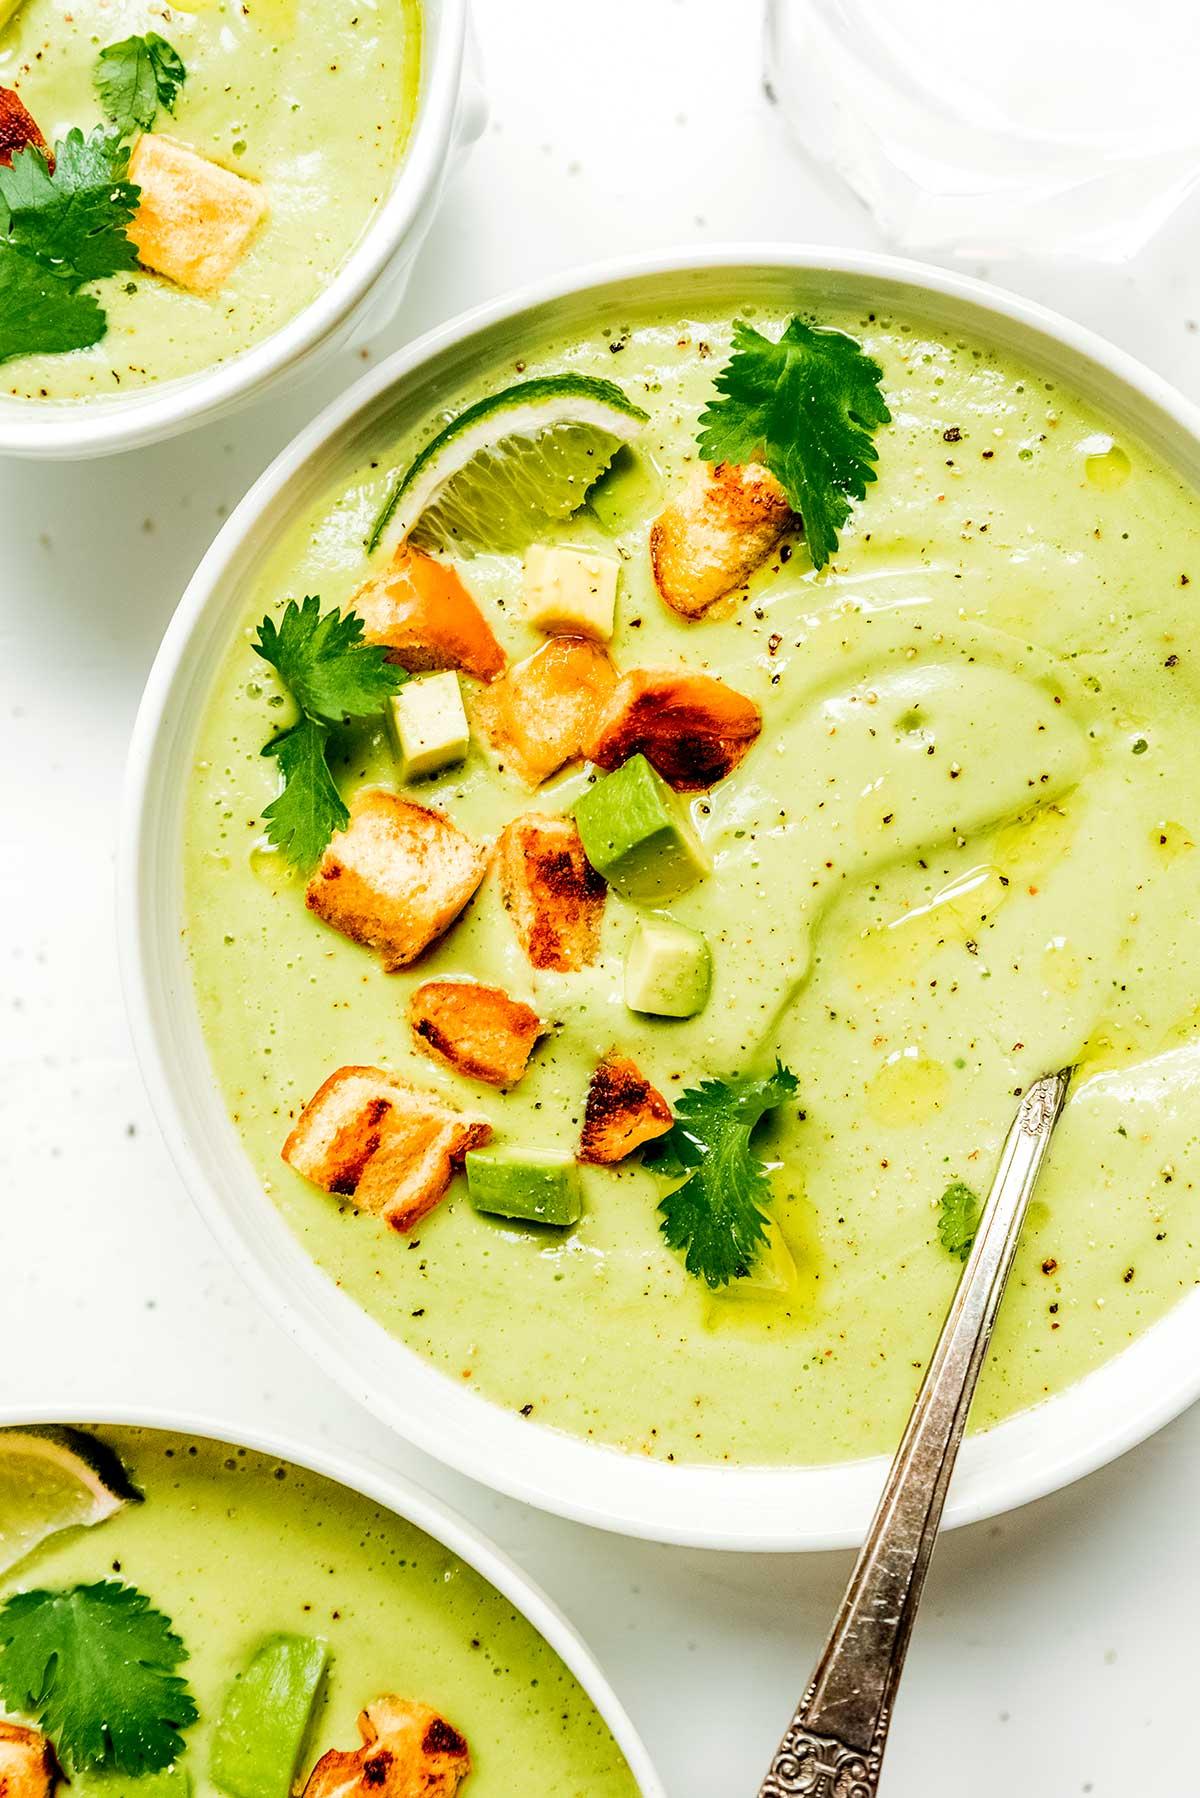 This creamy, vegan soup has a tang of lime juice, a taste of garlic, and a spicy kick from jalapeños! (via <a href="https://www.liveeatlearn.com/avocado-soup/"><strong>Live Eat Learn</strong></a>)